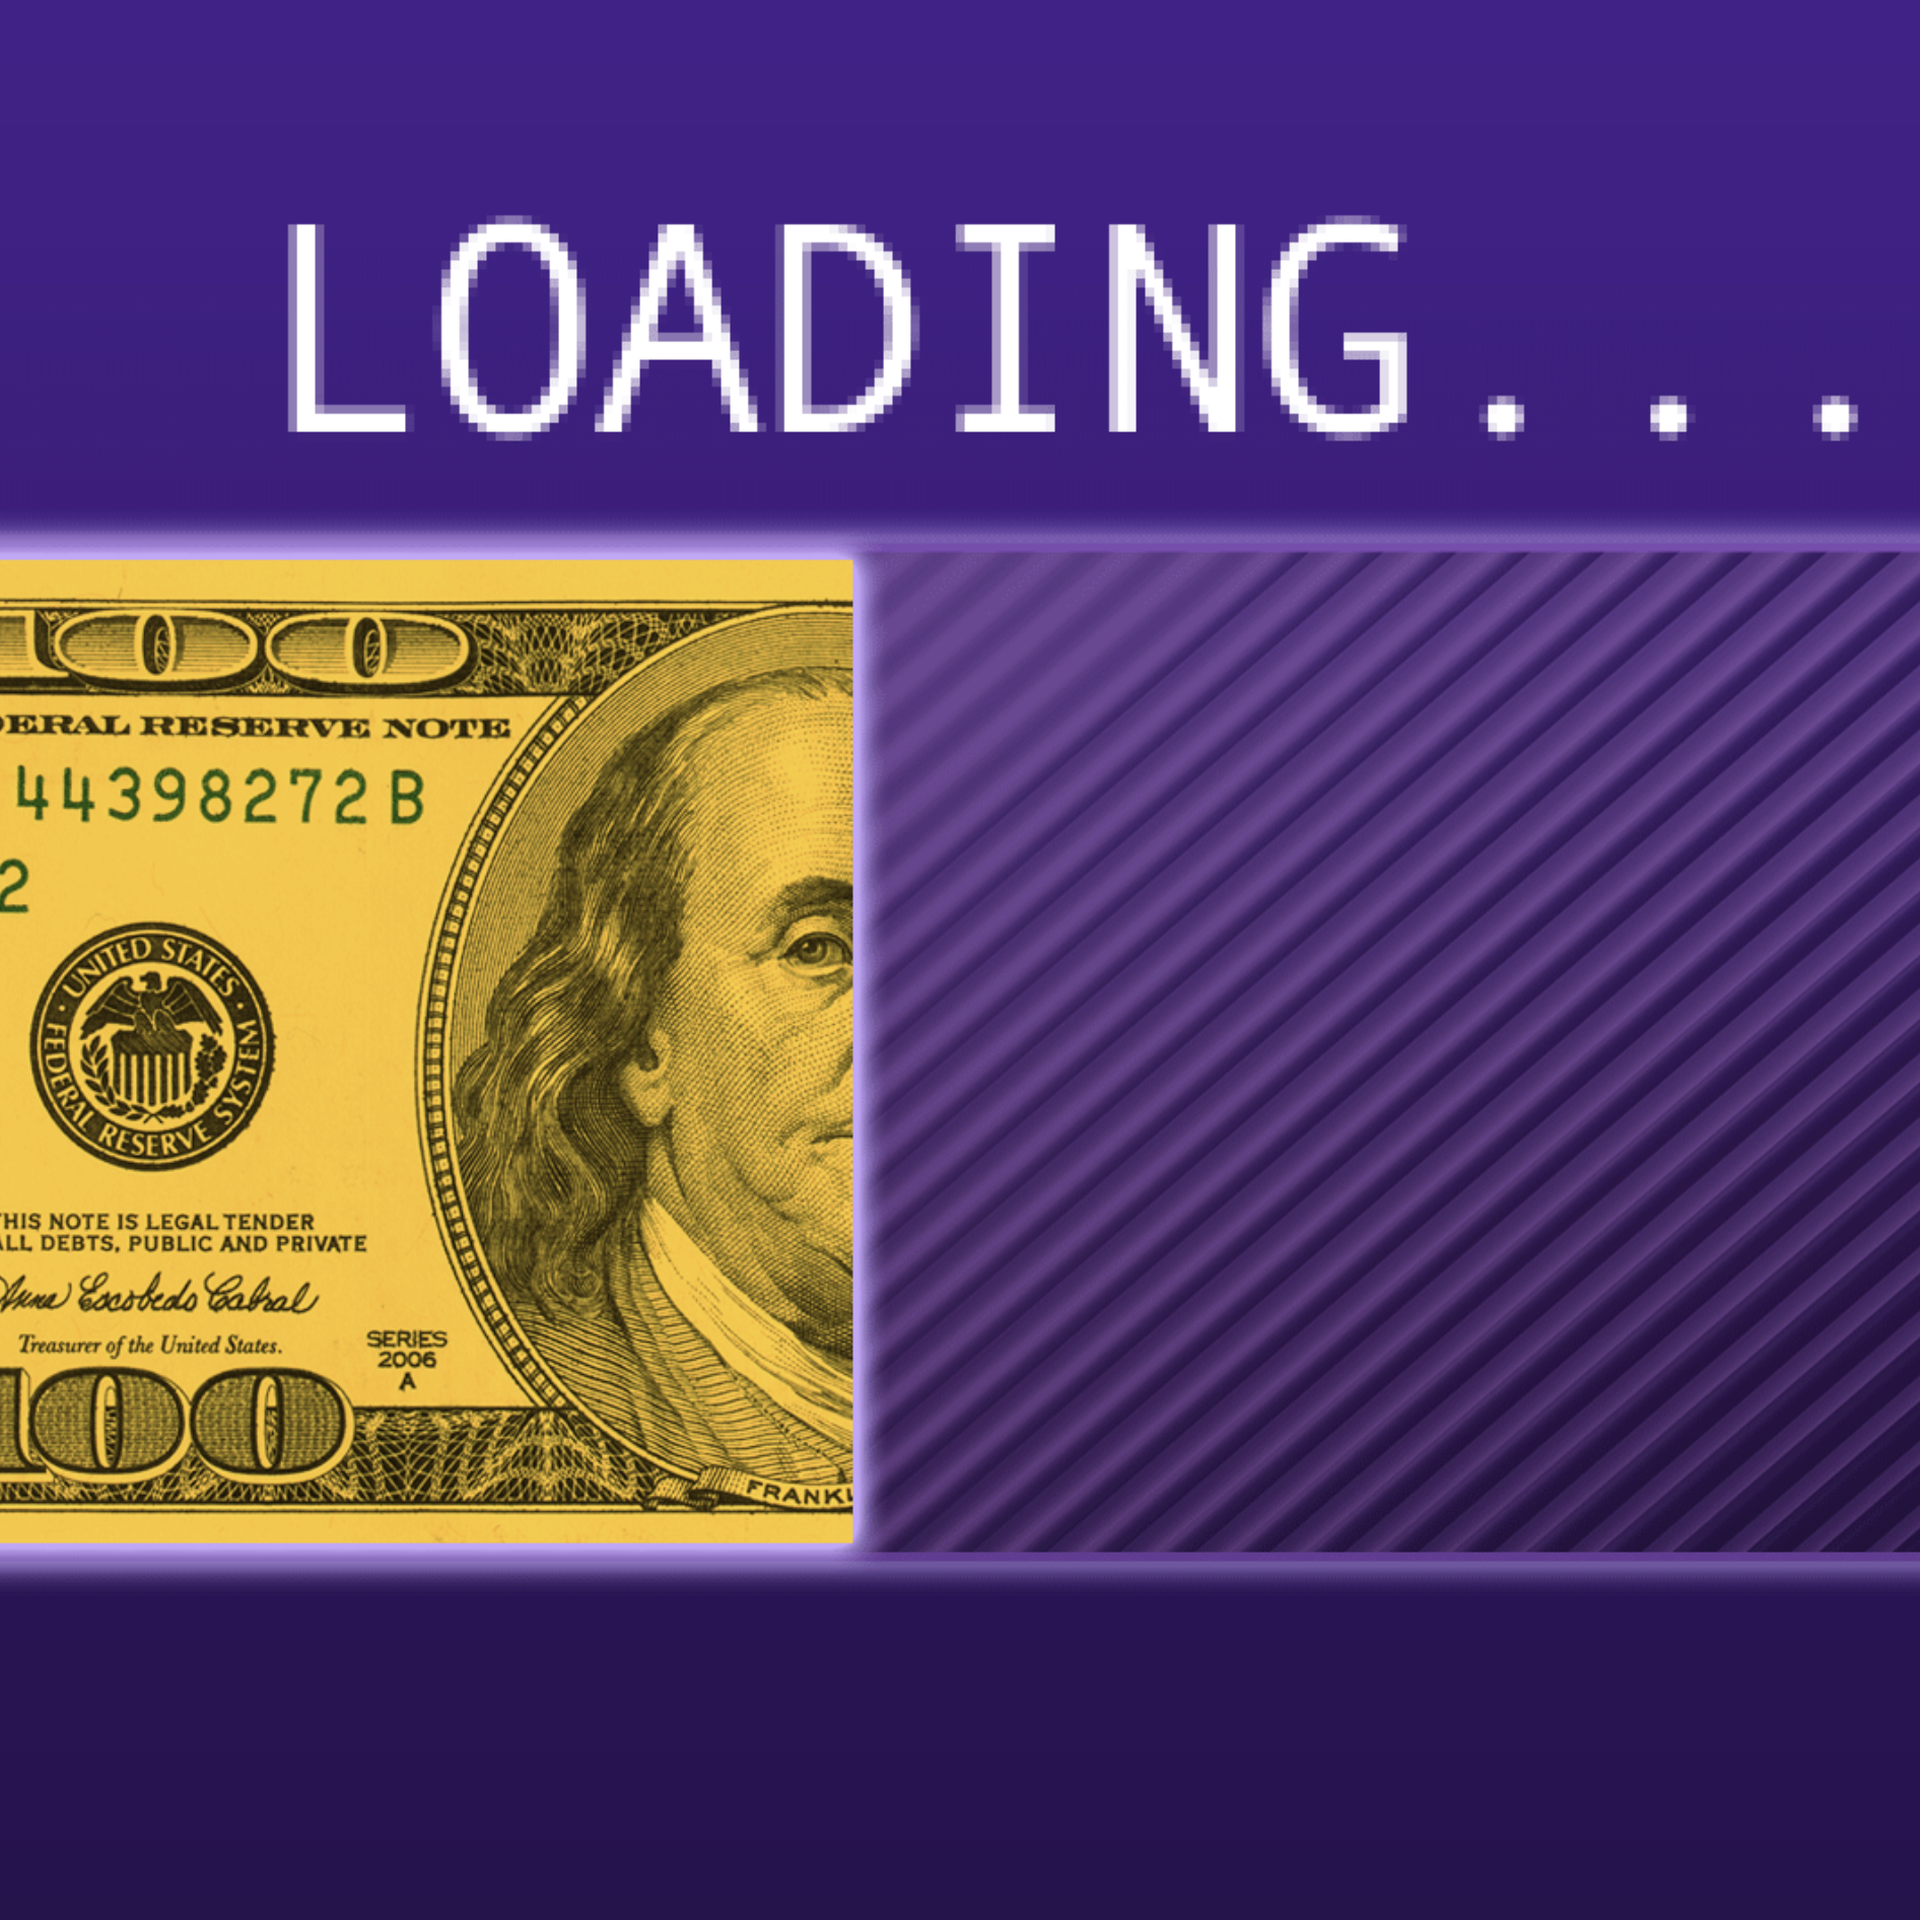 An illustration showing a $100 bill as a half-loaded loading bar.